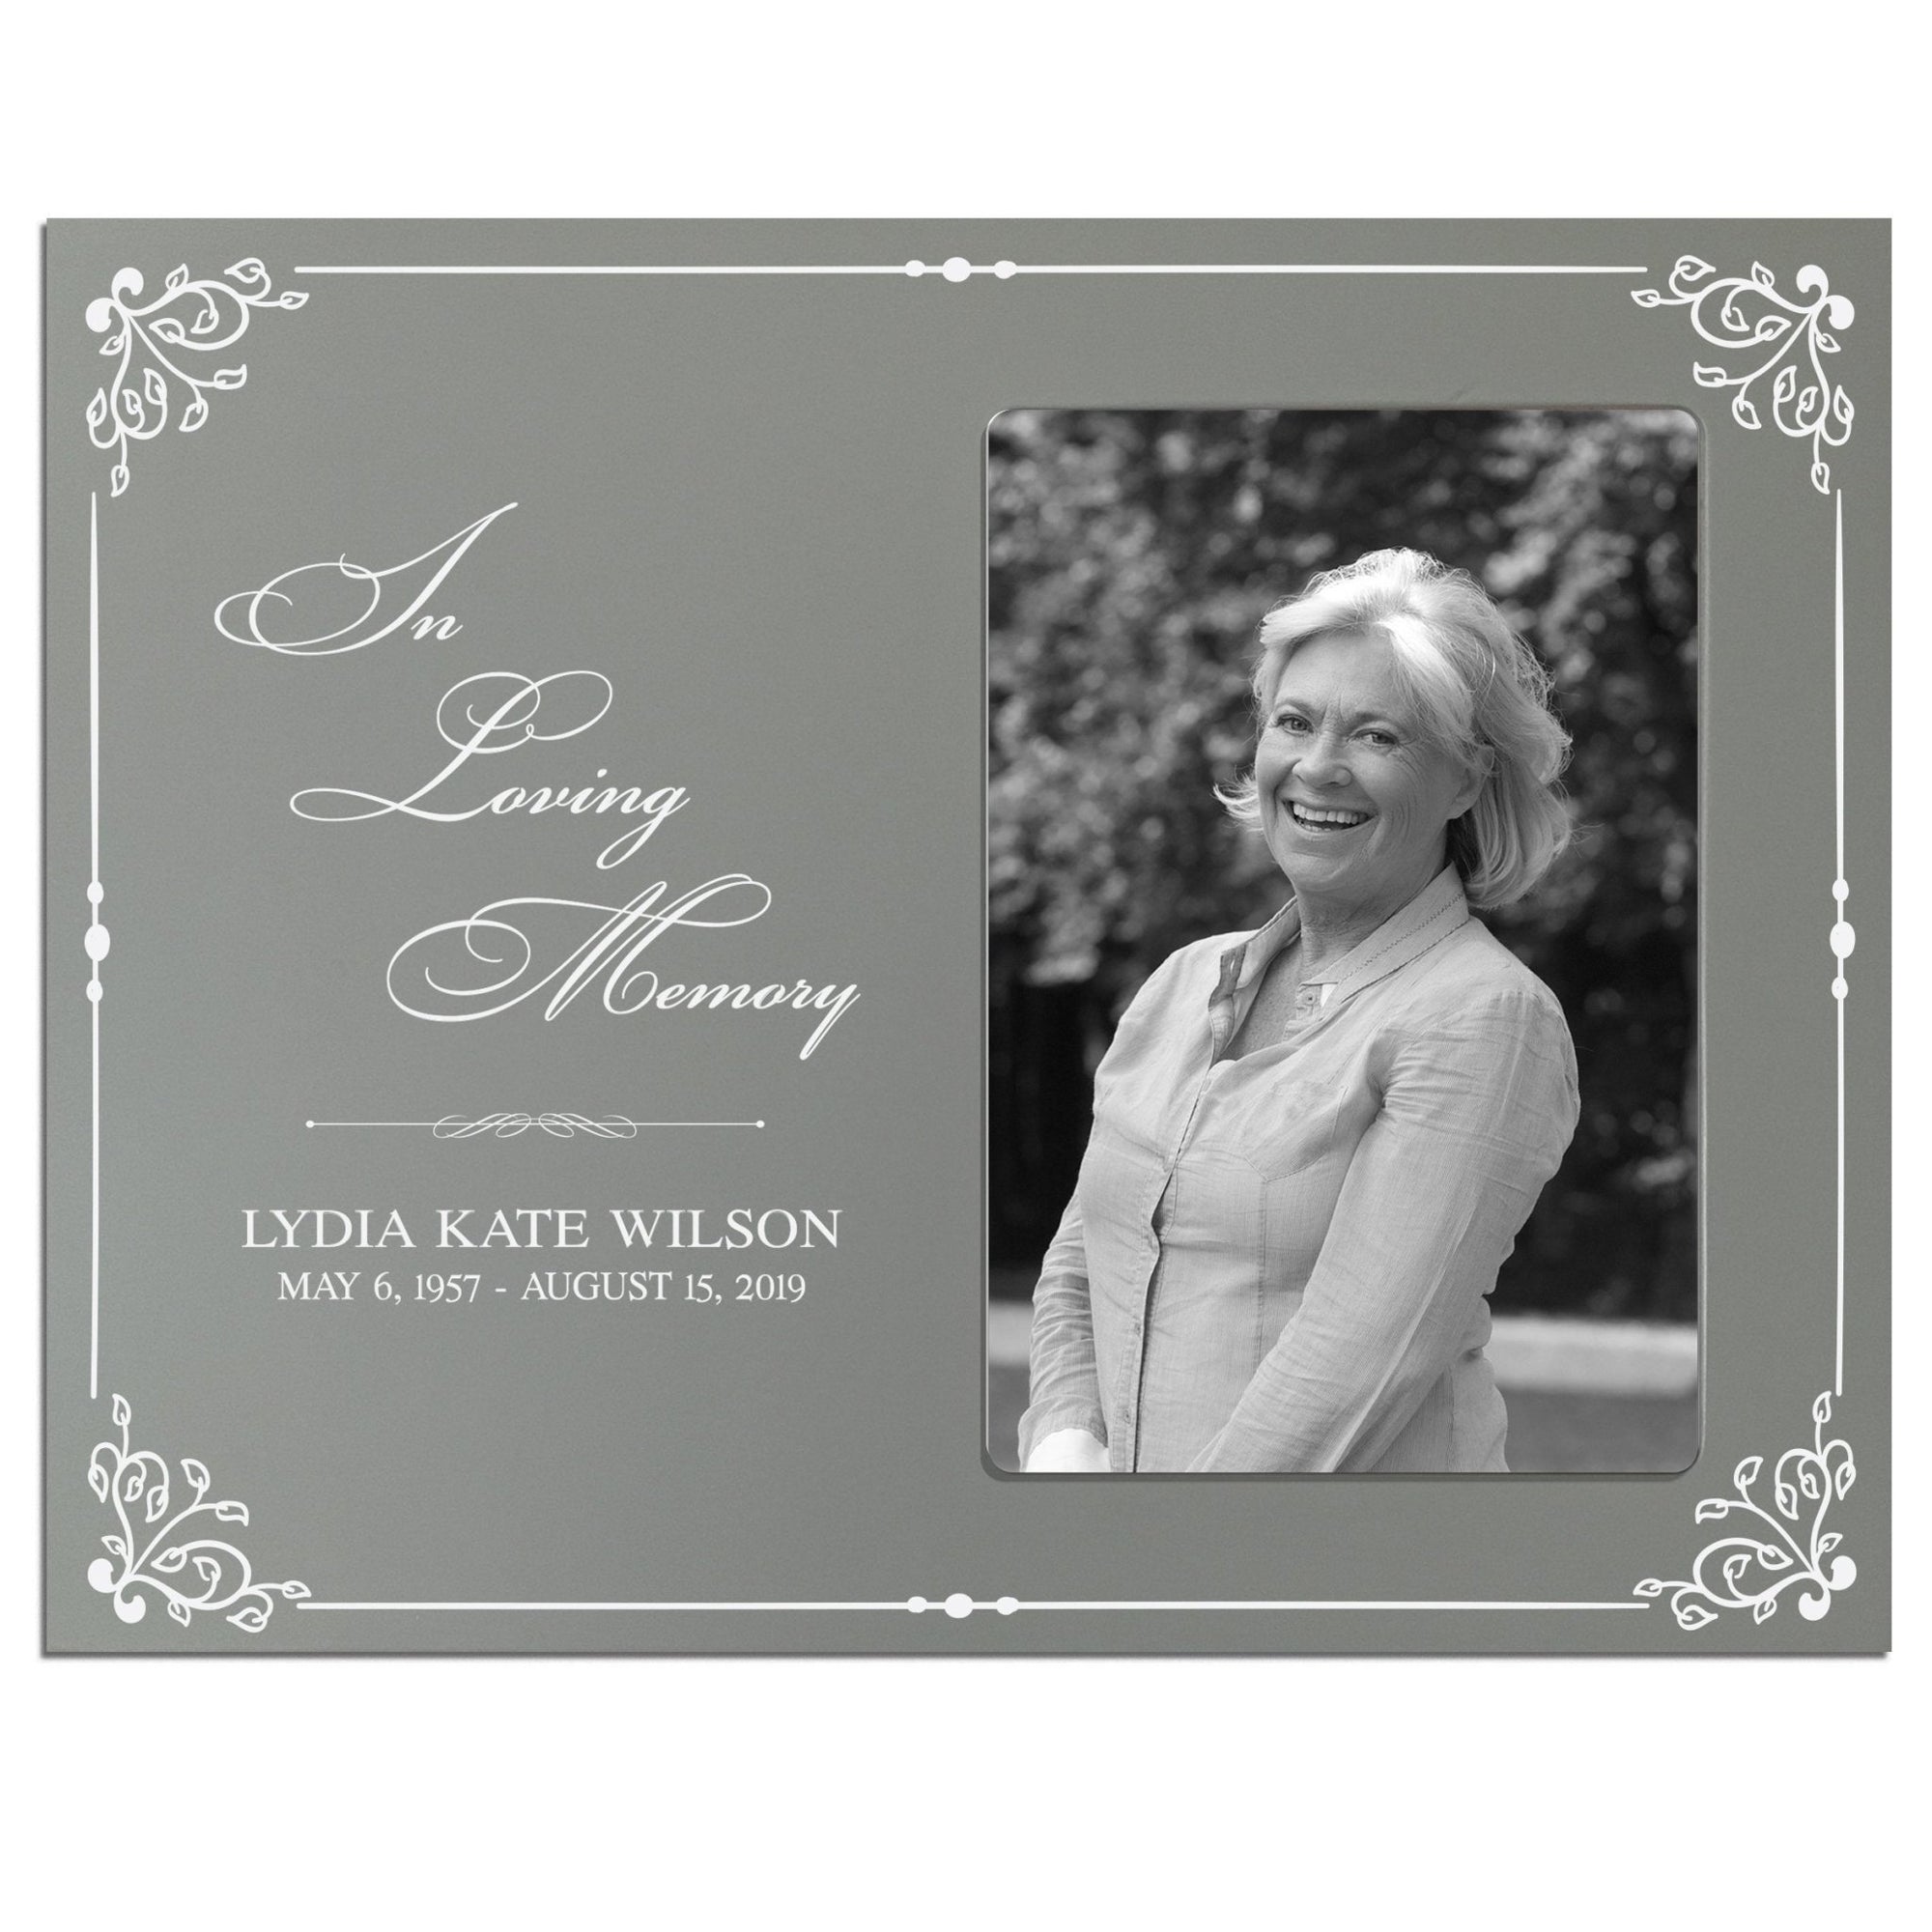 Personalized Wooden Memorial 8x10 Picture Frame holds 4x6 photo In Loving Memory Border - LifeSong Milestones